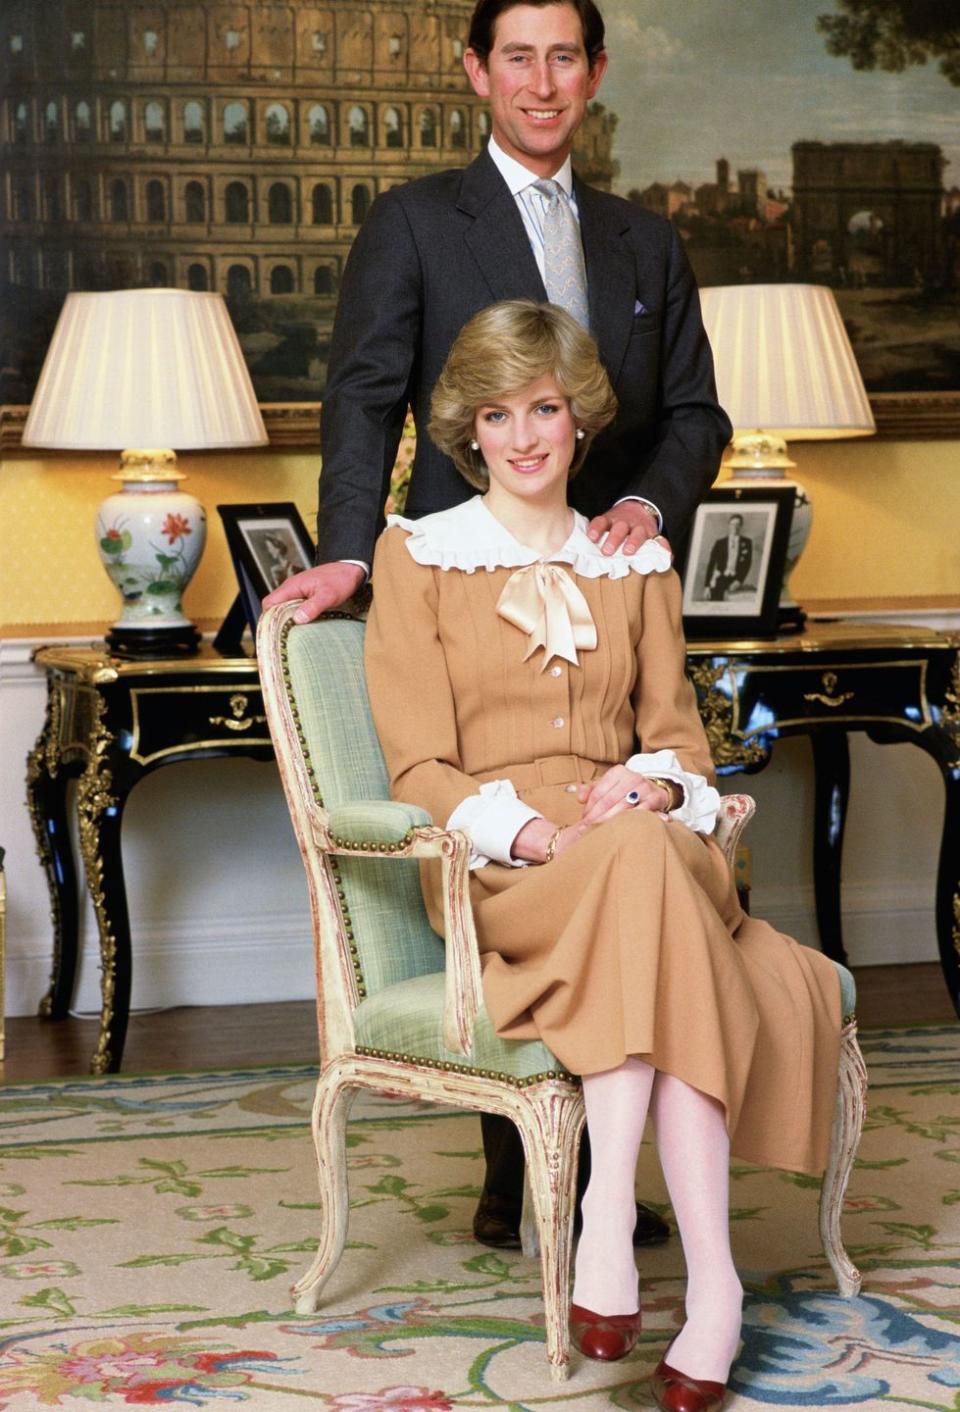 The Royal Couple Poses For A Portrait